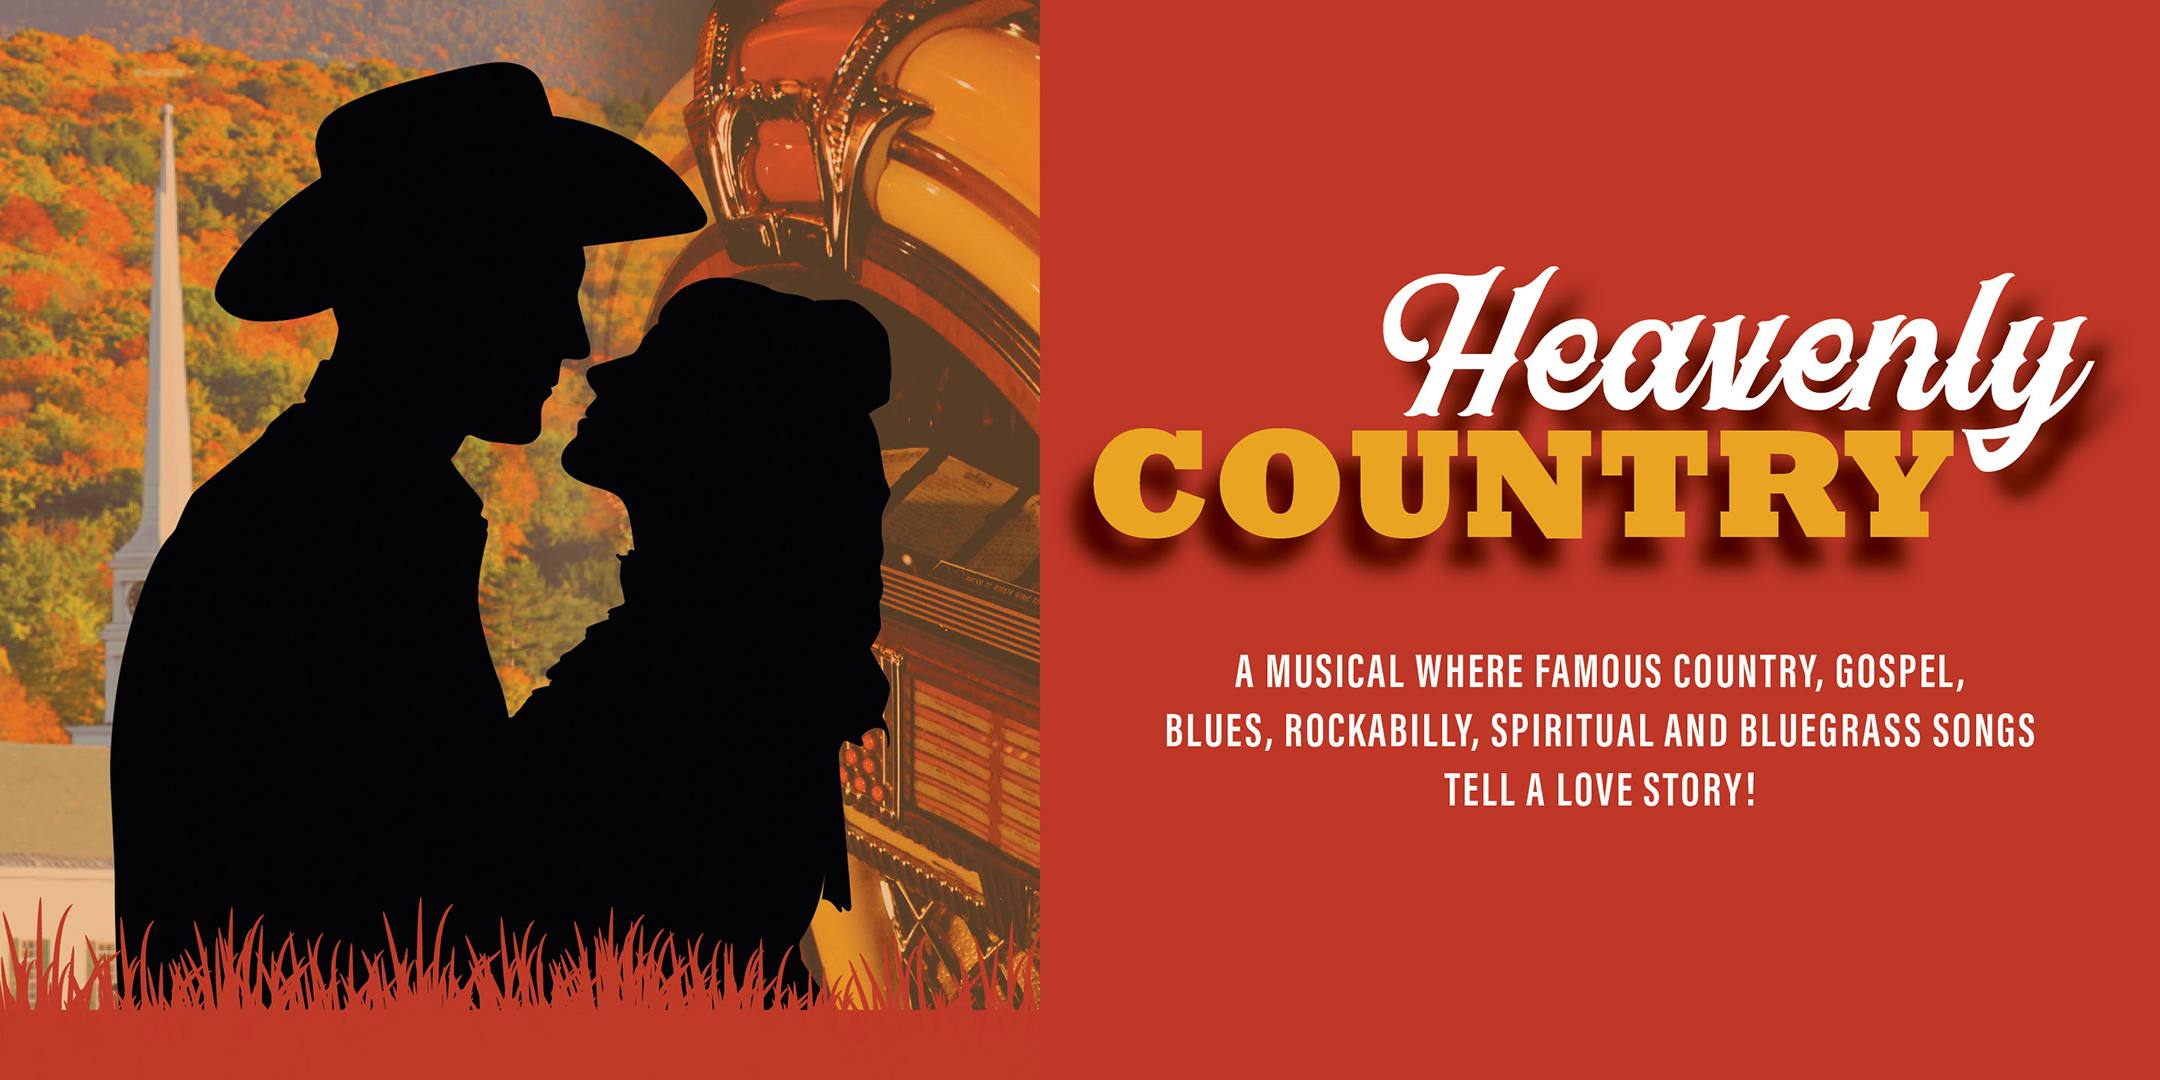 Graphic for "Heavenly Country"